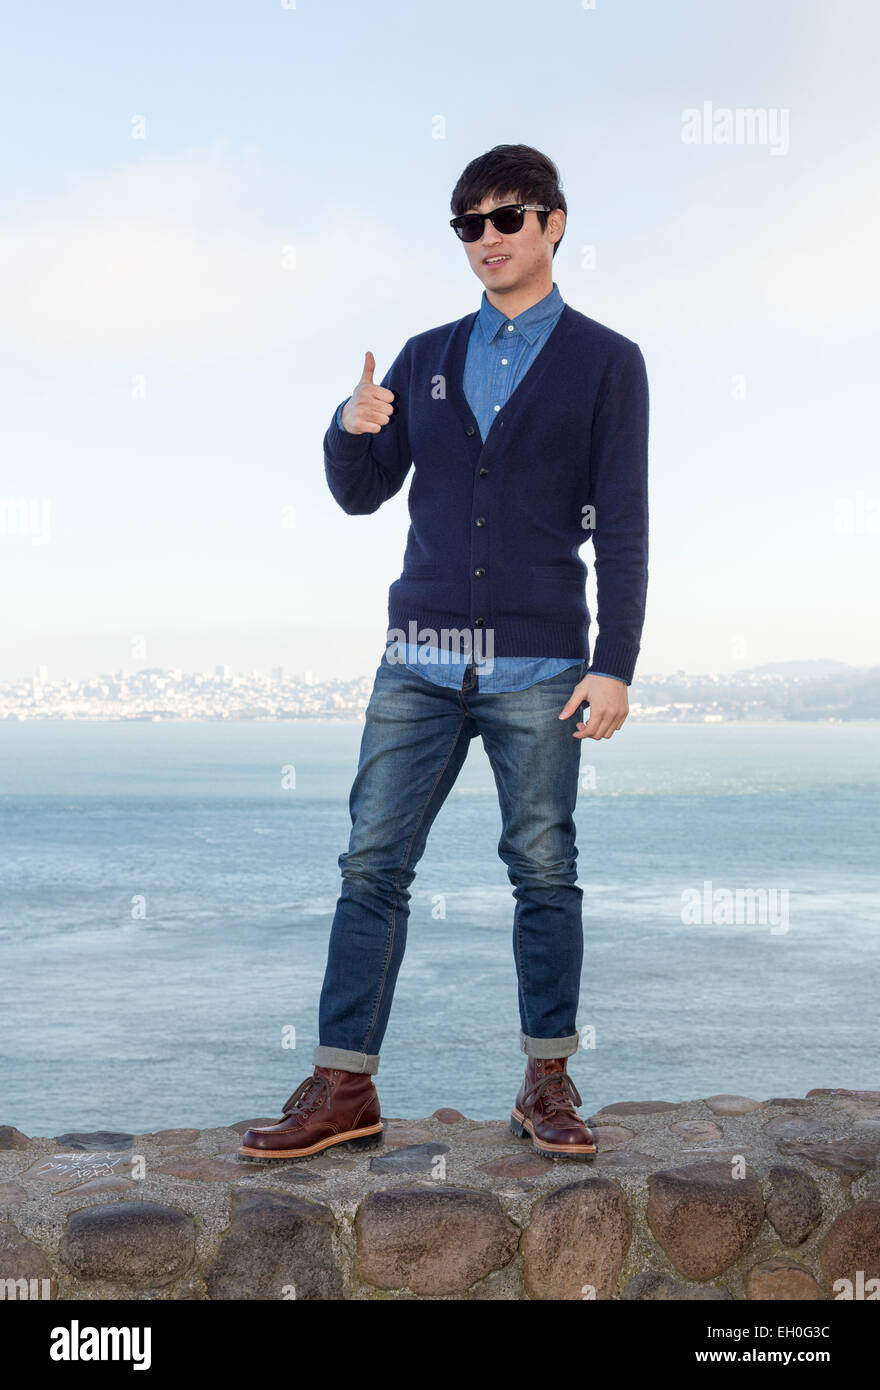 1, one, Asian man, posing for photograph, tourist, visitor, visiting, north side of Golden Gate Bridge, Vista Point, city of Sausalito, California Stock Photo